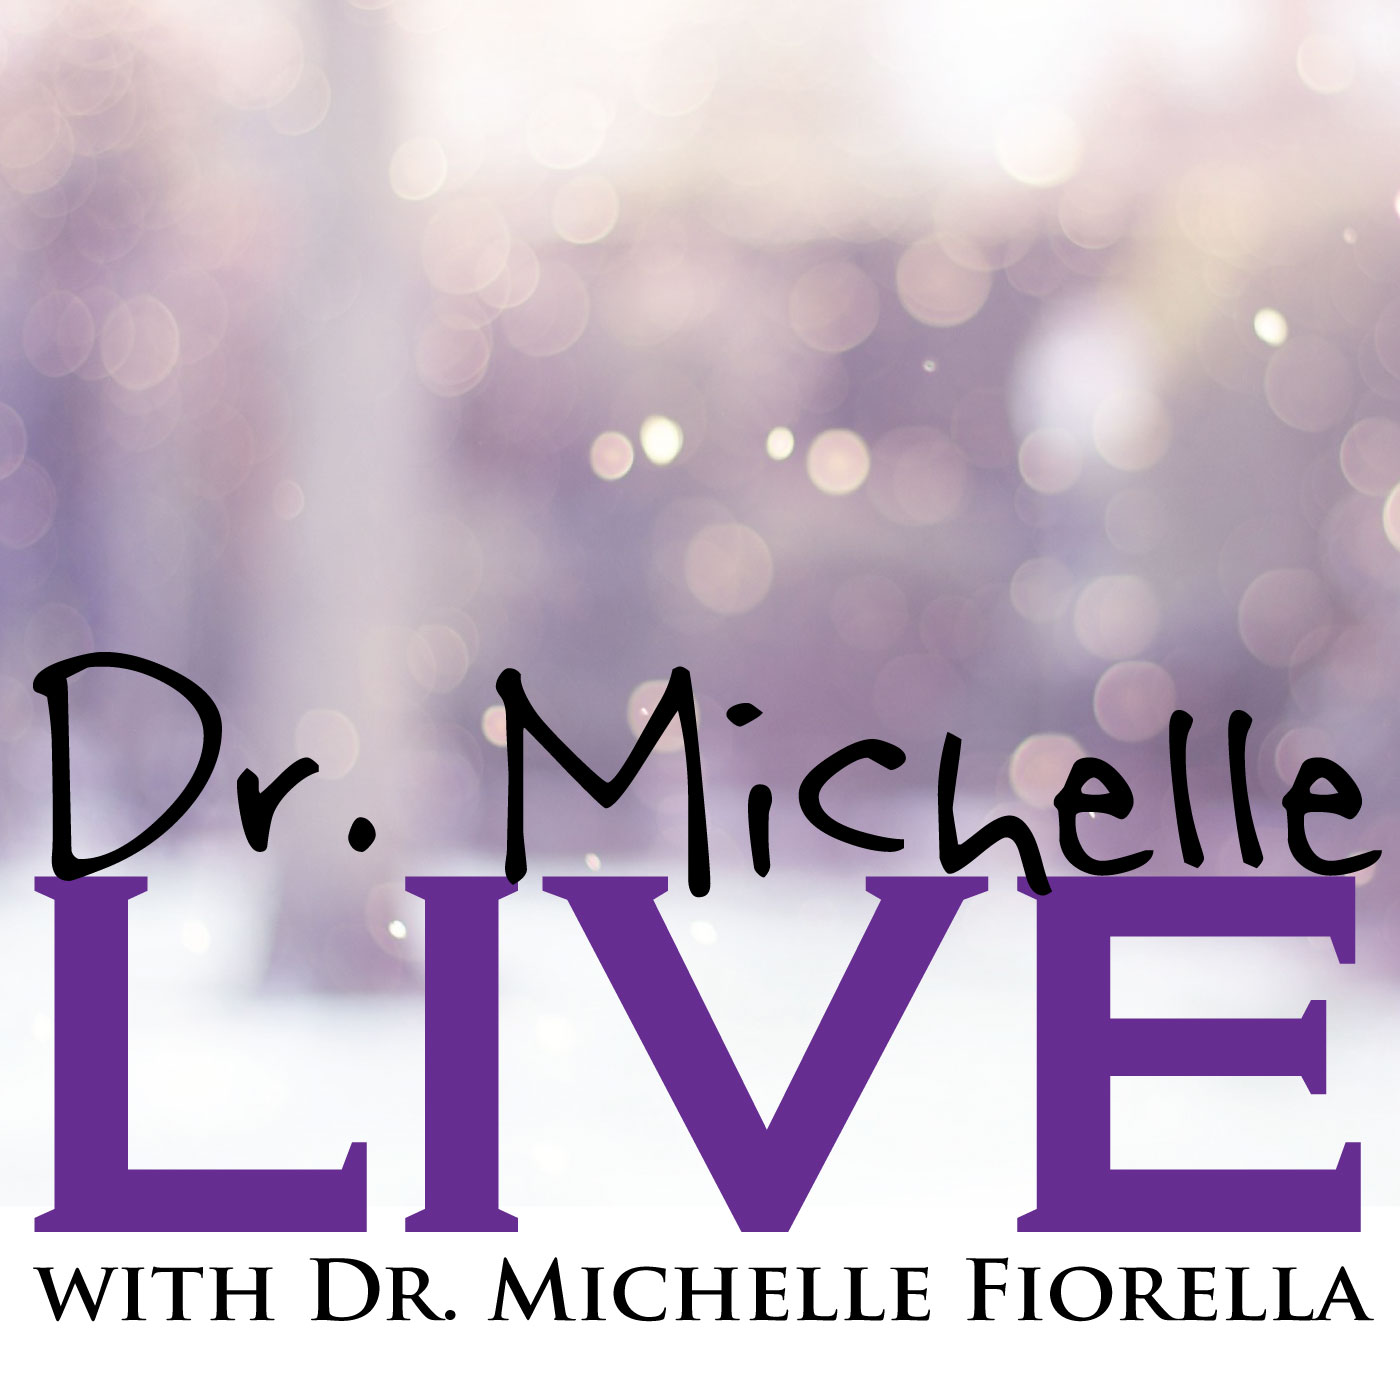 Dr. Michelle Live! 02/27/17 The Backdoor Approach To Gratefulness